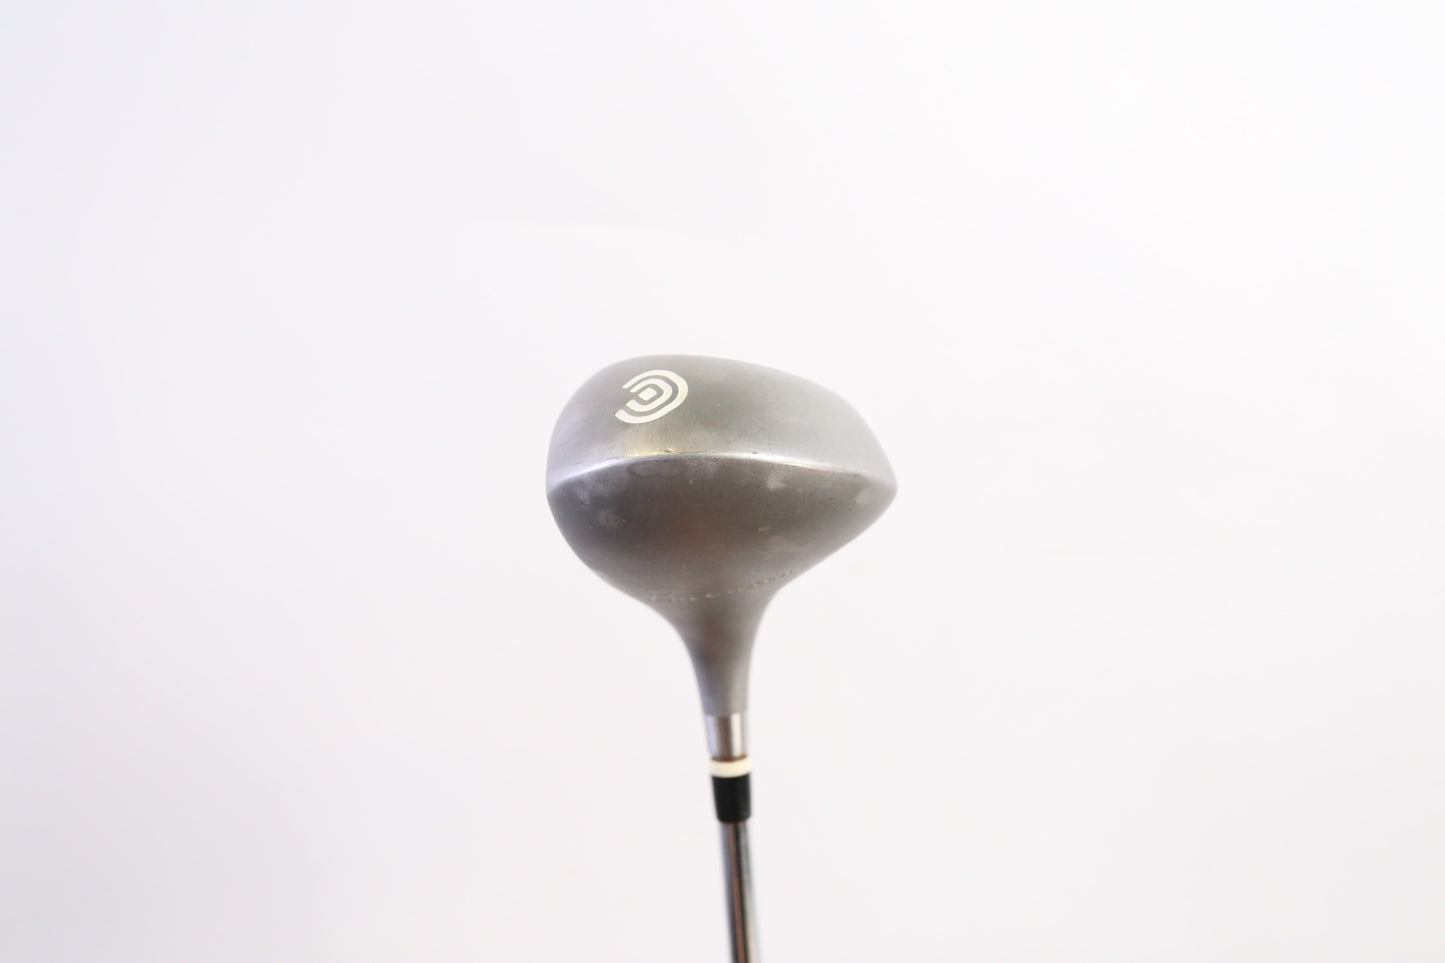 Used Cleveland Classic Collection Driver - Right-Handed - 9 Degrees - Stiff Flex